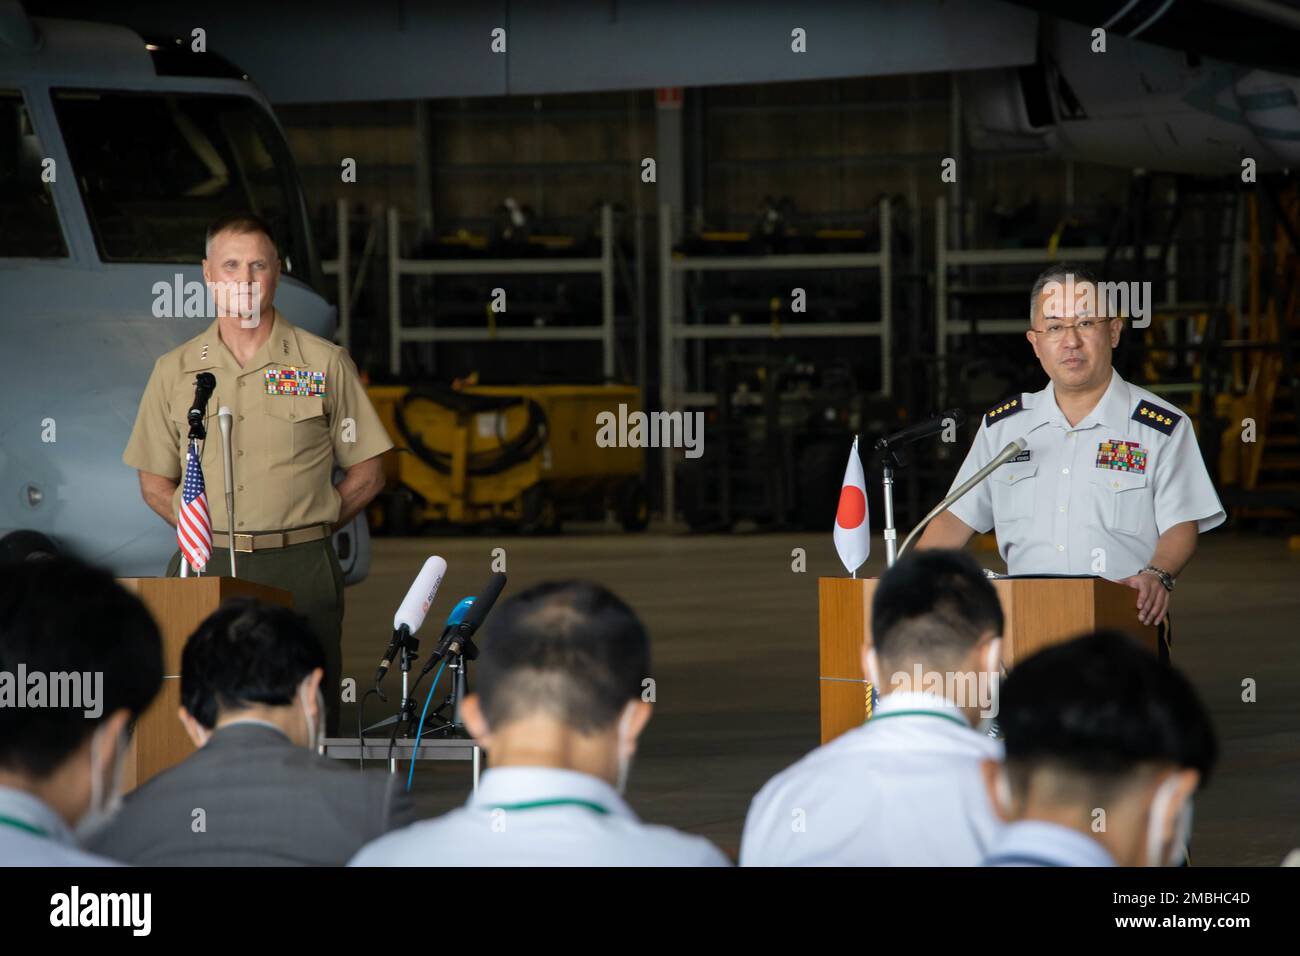 U.S. Marine Corps Lt. Gen. Steven R. Rudder, left, commander, U.S. Marine Corps Forces, Pacific, and Japan Ground Self-Defense Force Gen. Yoshida, chief of staff, answer questions during a press conference for the Pacific Amphibious Leaders Symposium, Camp Kisarazu, Japan, June 16, 2022. This iteration of PALS brought senior leaders of allied and partnered militaries together to discuss amphibious force readiness, expeditionary advanced base operations, intermediate force capabilities, and ways to improve interoperability between partners within the Indo-Pacific region. A total of 18 participa Stock Photo